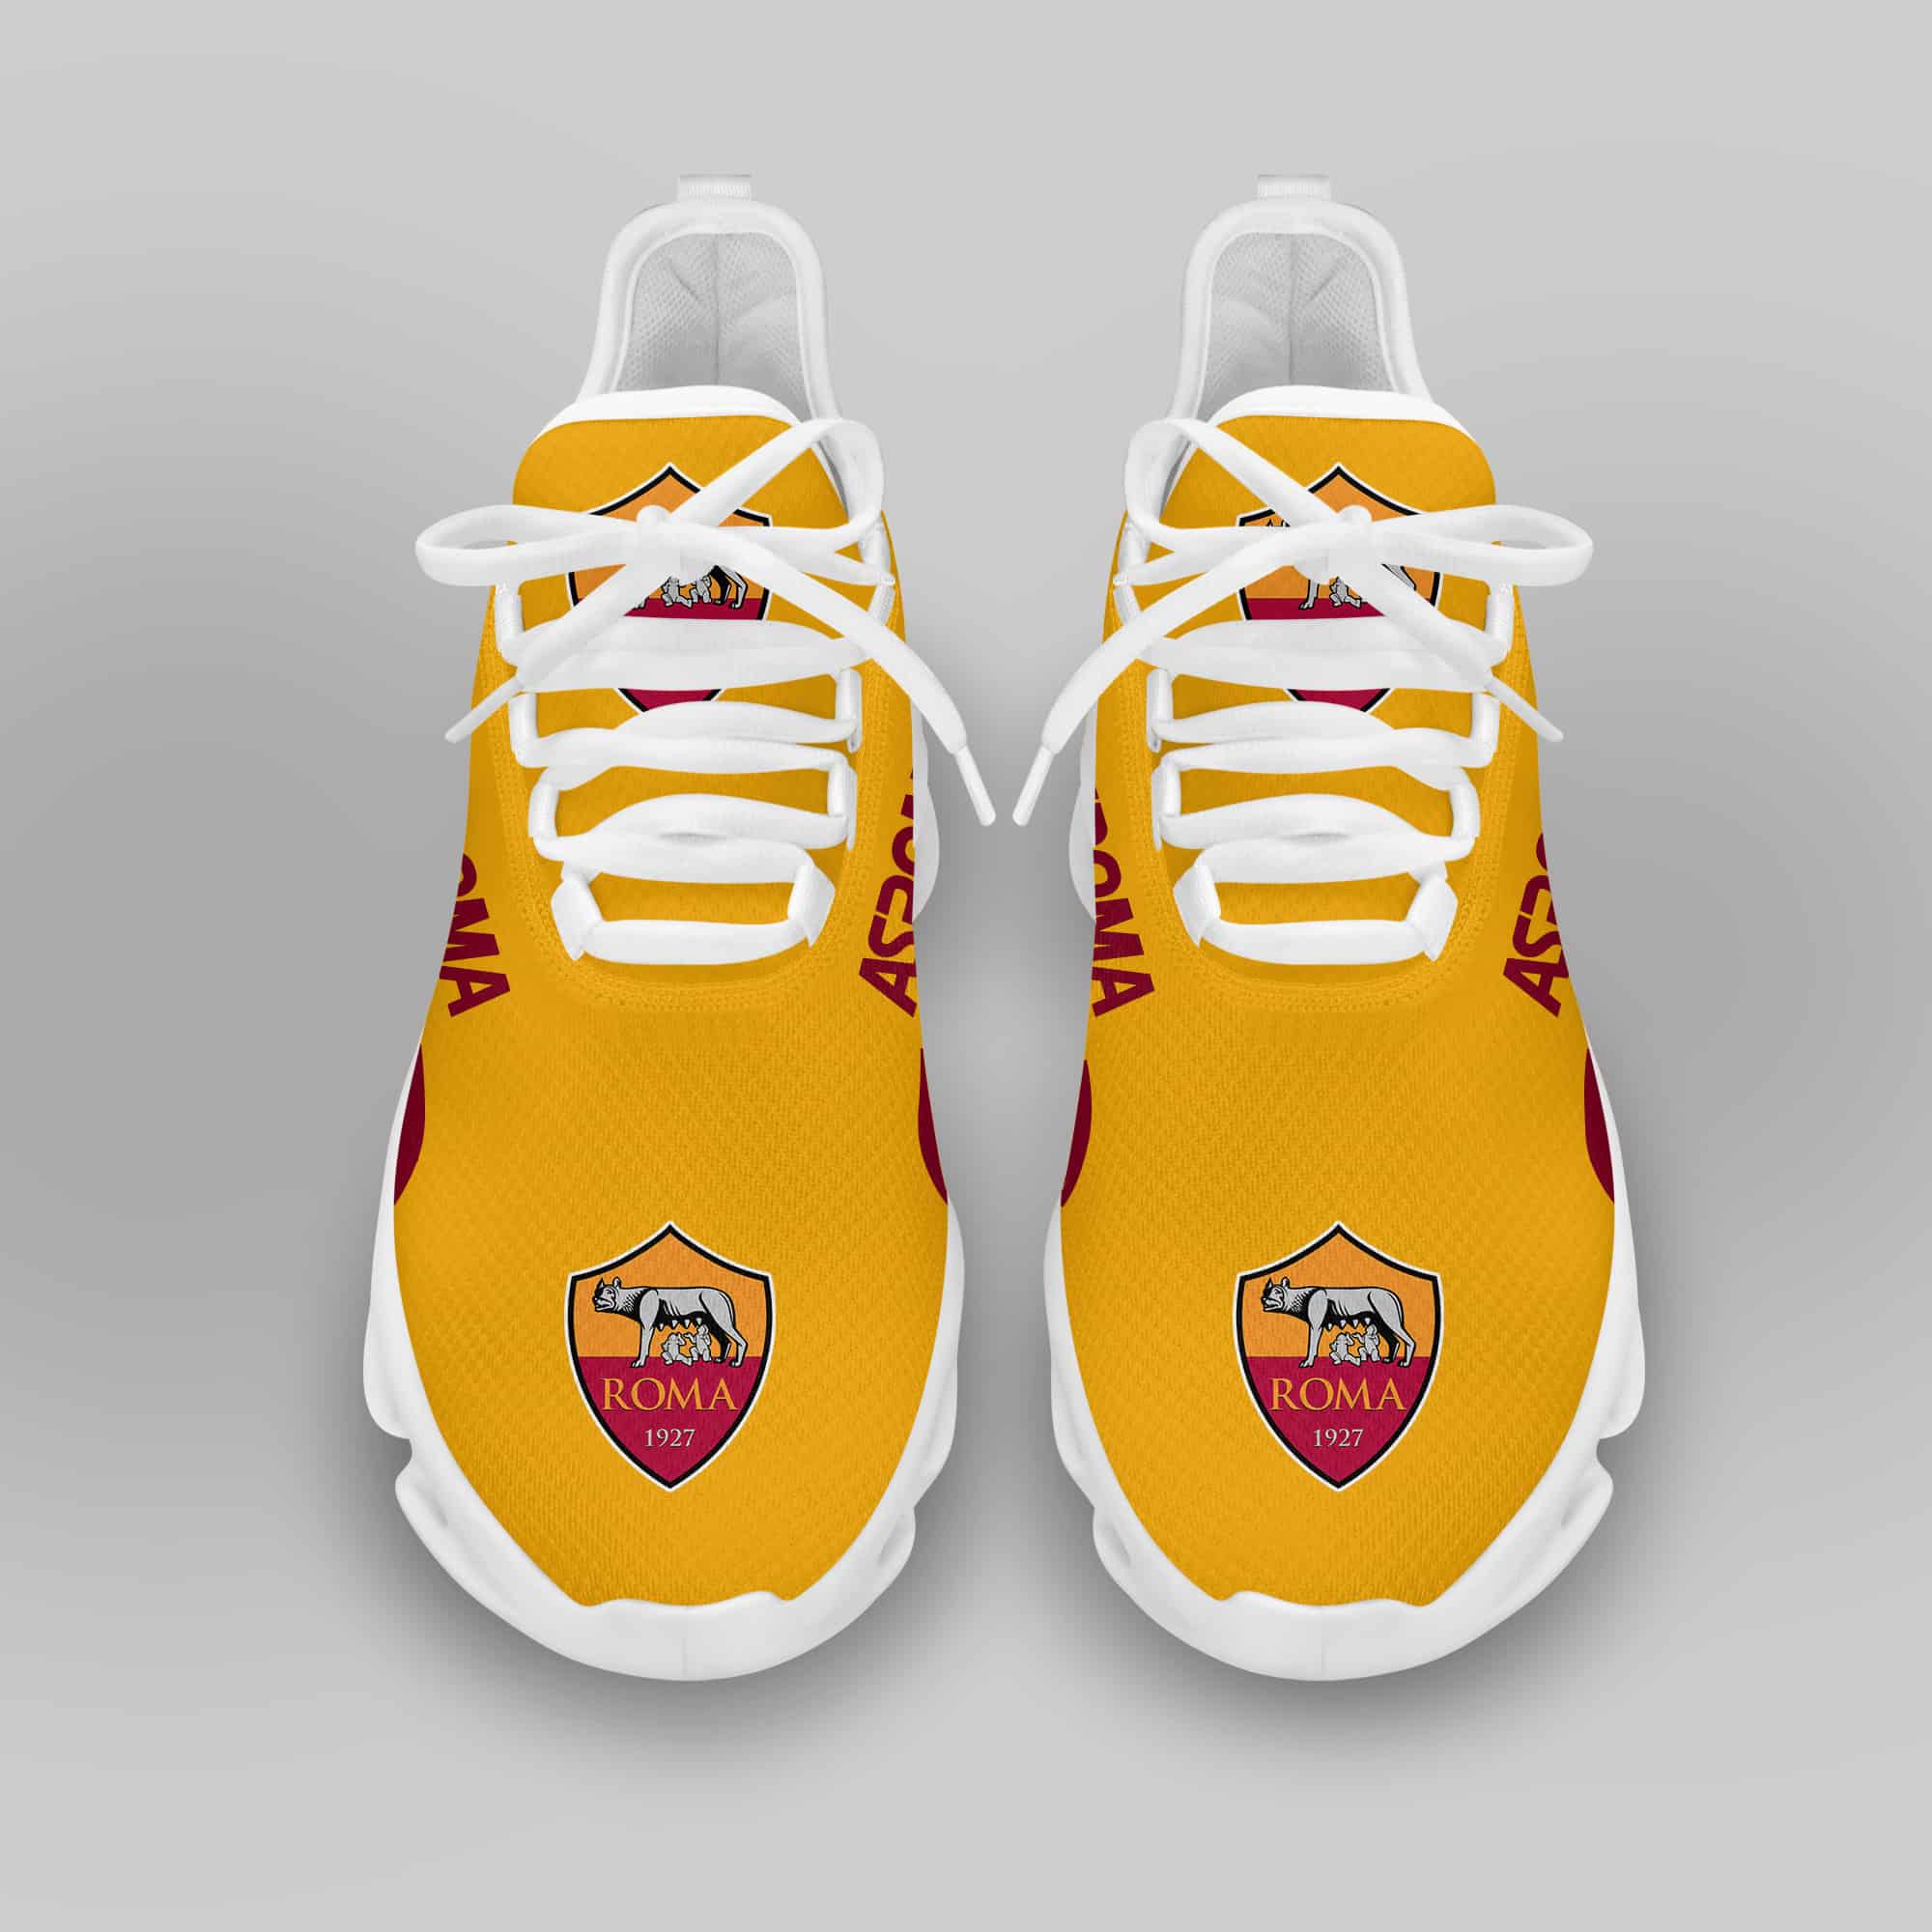 As Roma Running Shoes Max Soul Shoes Sneakers Ver 3 3